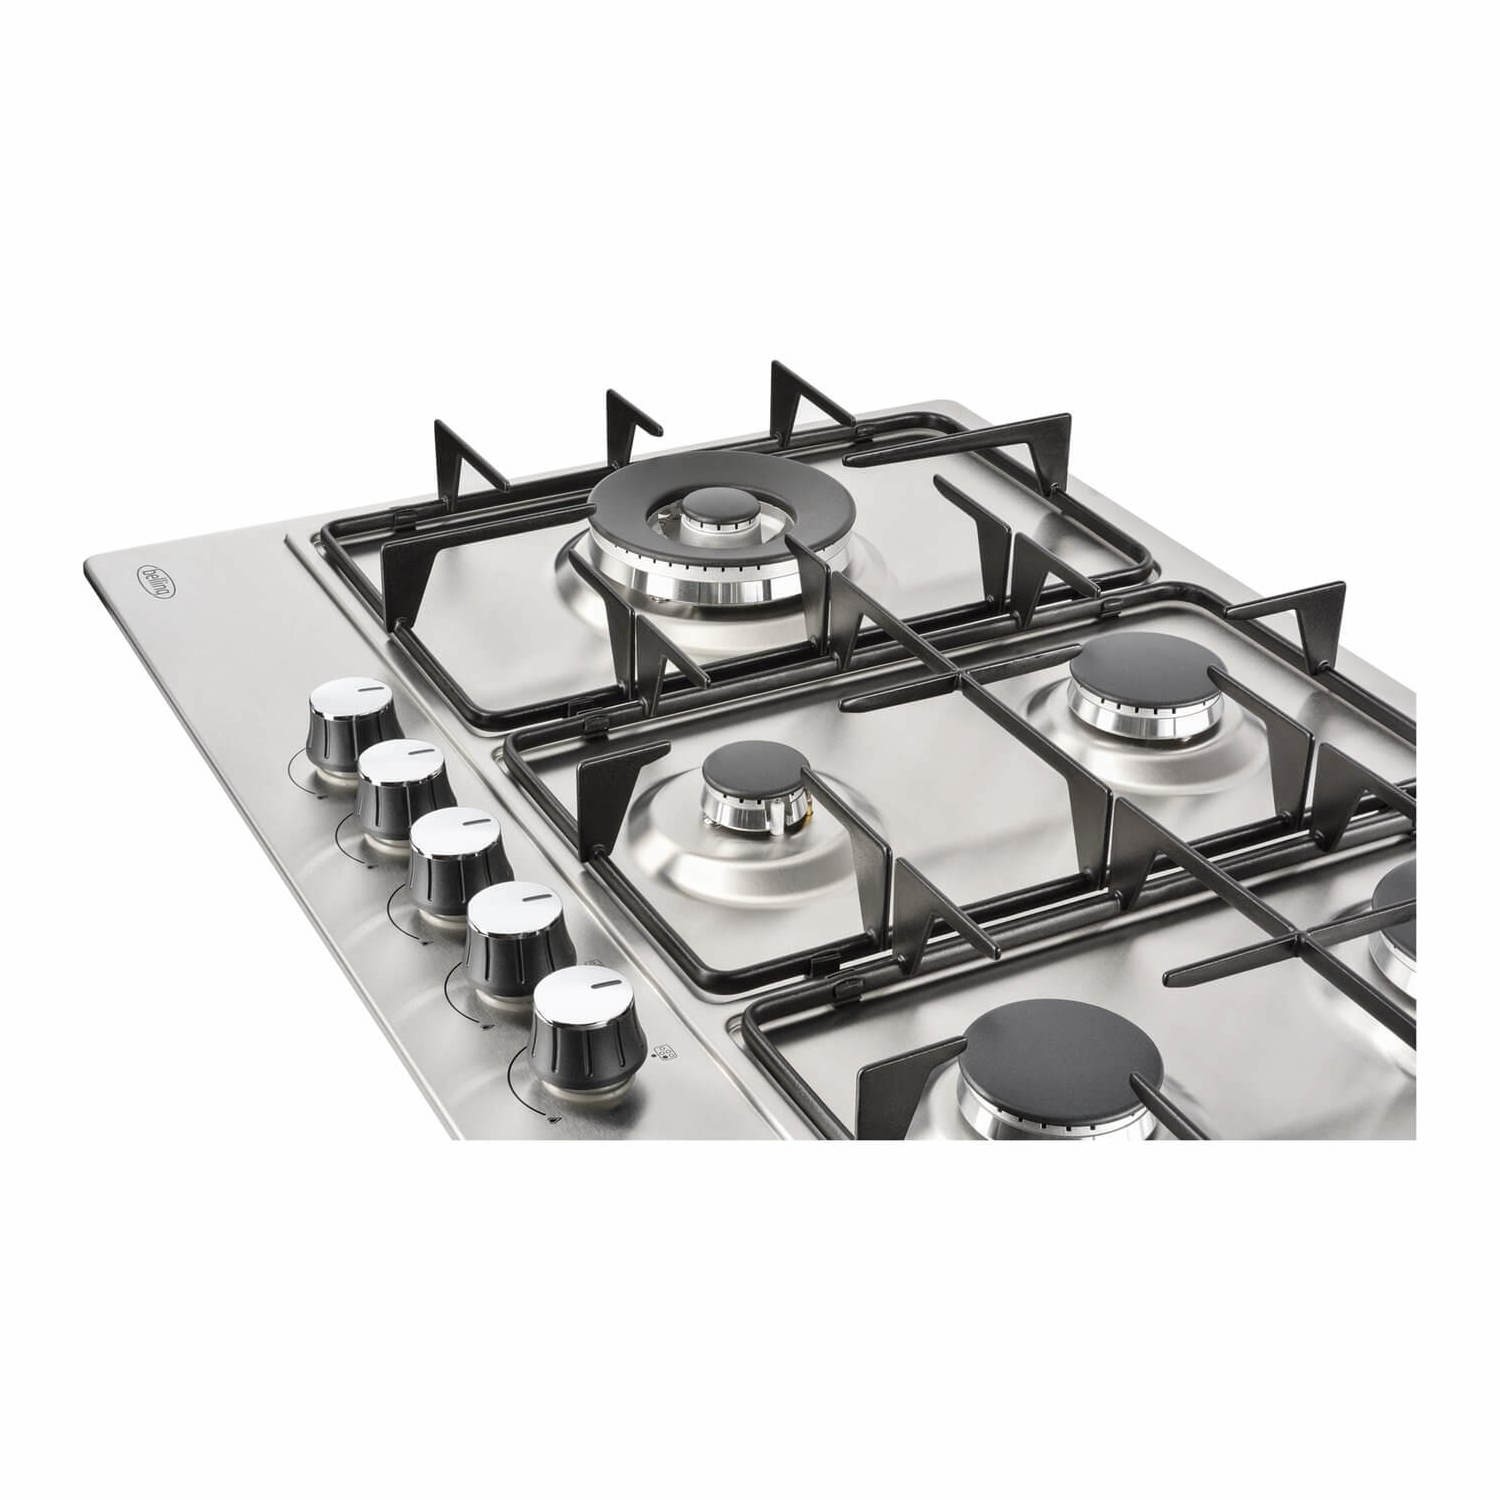 Belling GHU602GC 60cm Front Control Four Burner Gas Hob Stainless Steel 